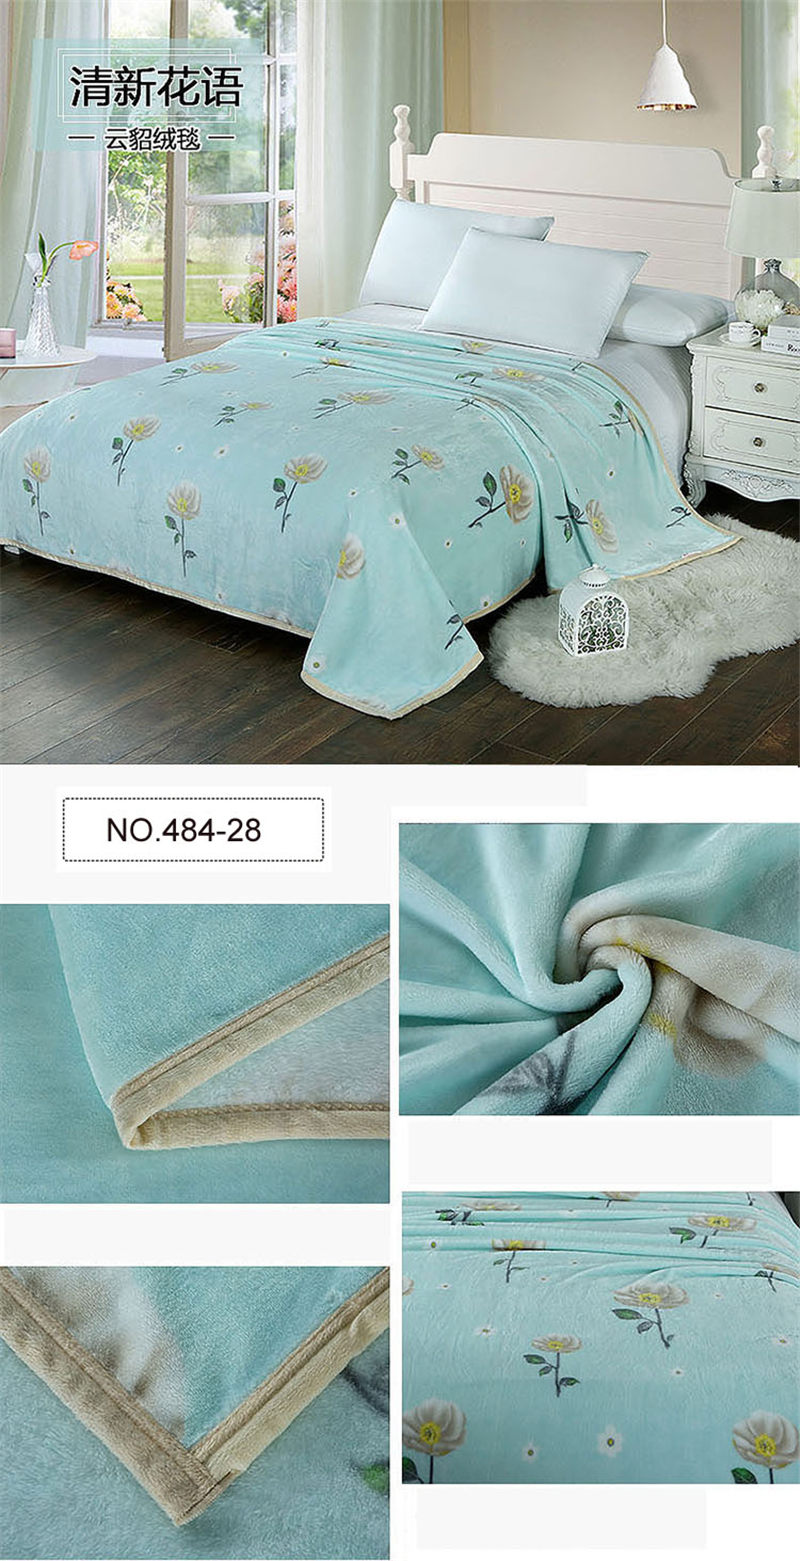 Super Soft Fawn Print Floral Bedding Throws